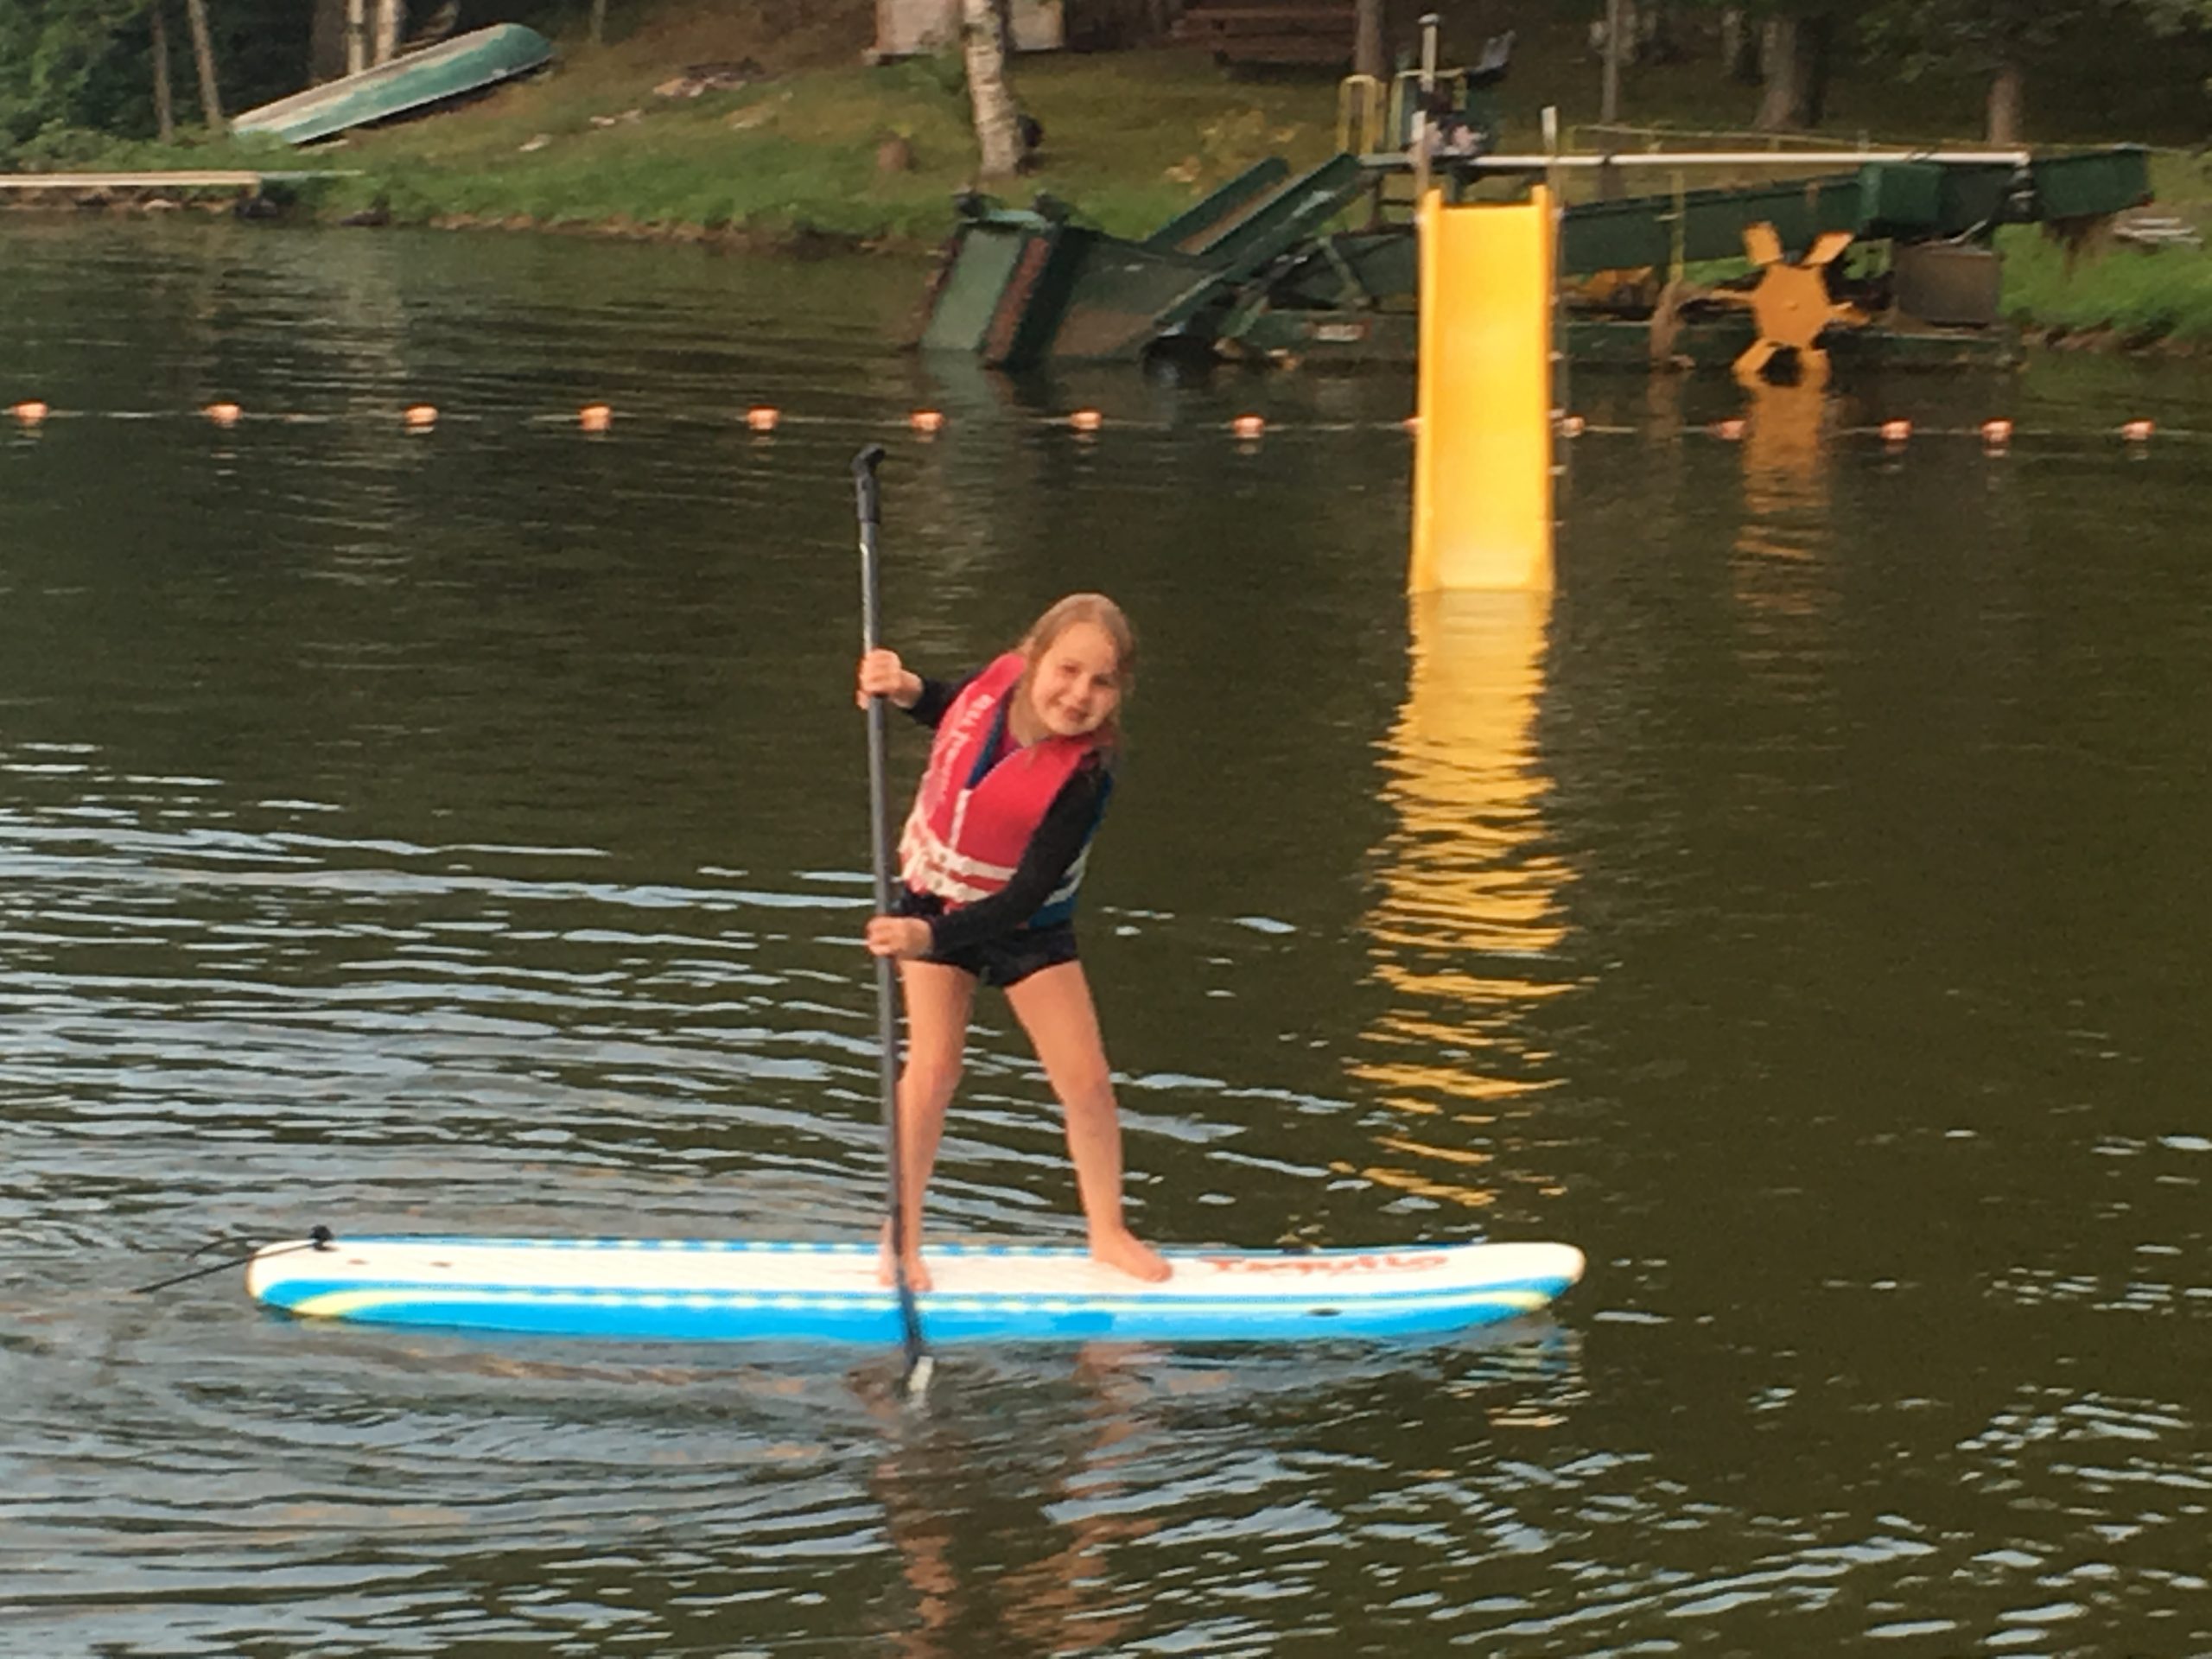 Young girl on stand up paddleboard.